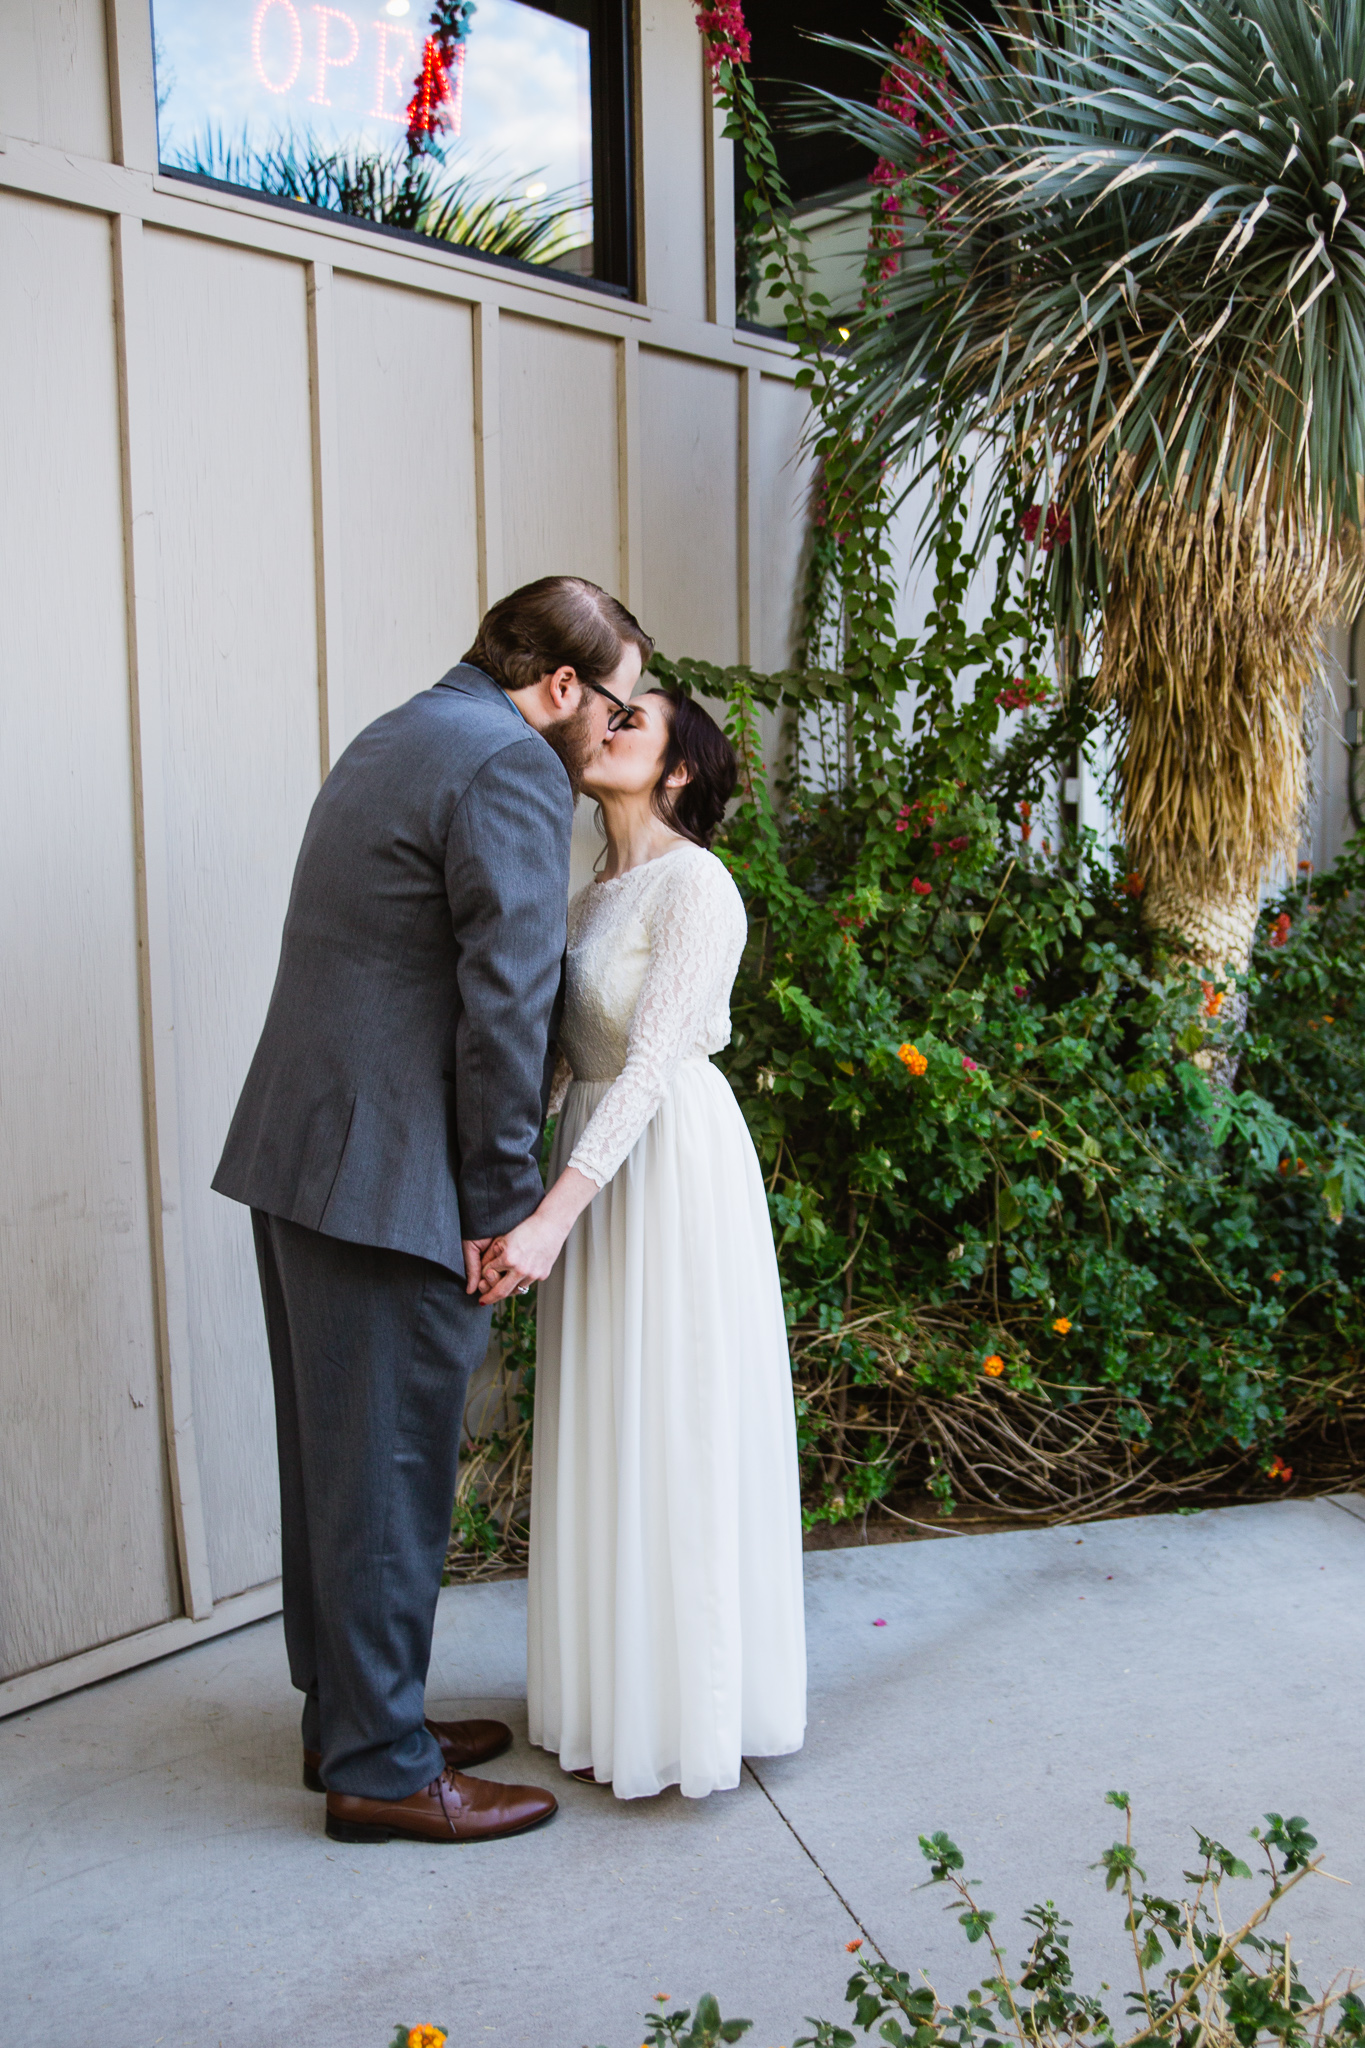 Vintage bride and groom kissing in front of Changing Hand bookstore in Phoenix Arizona.